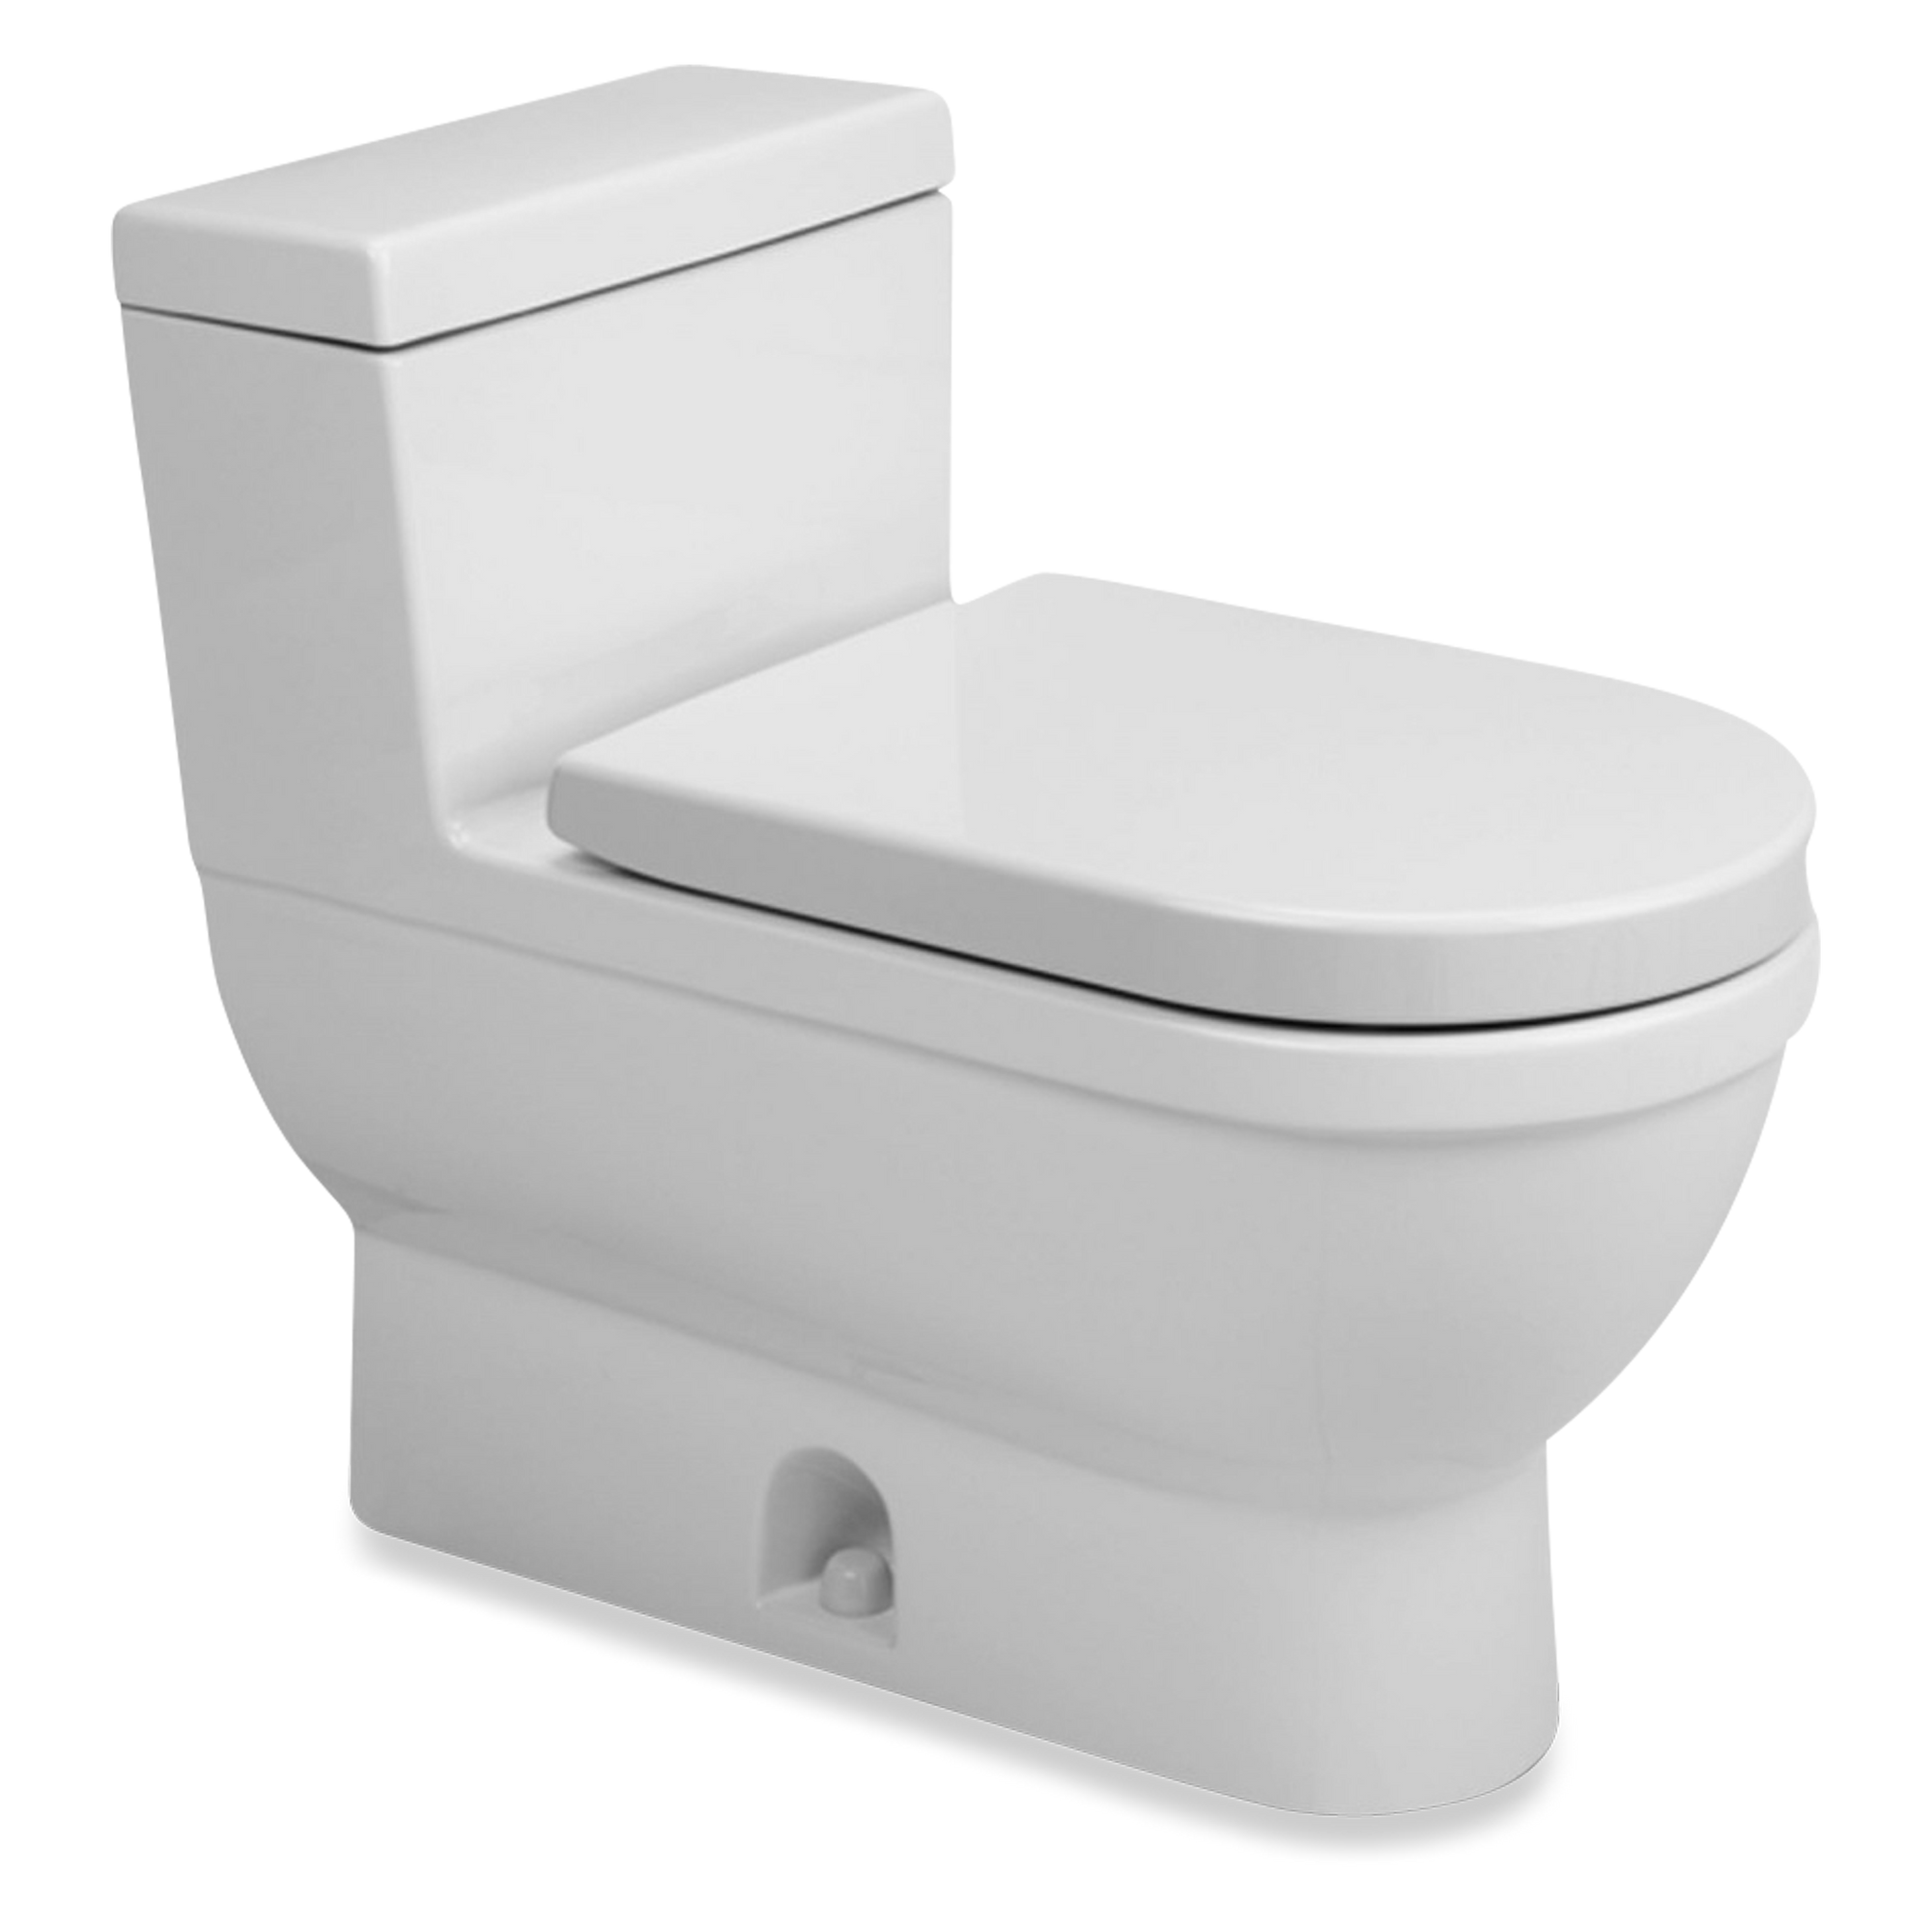 A modern style one-piece toilet.